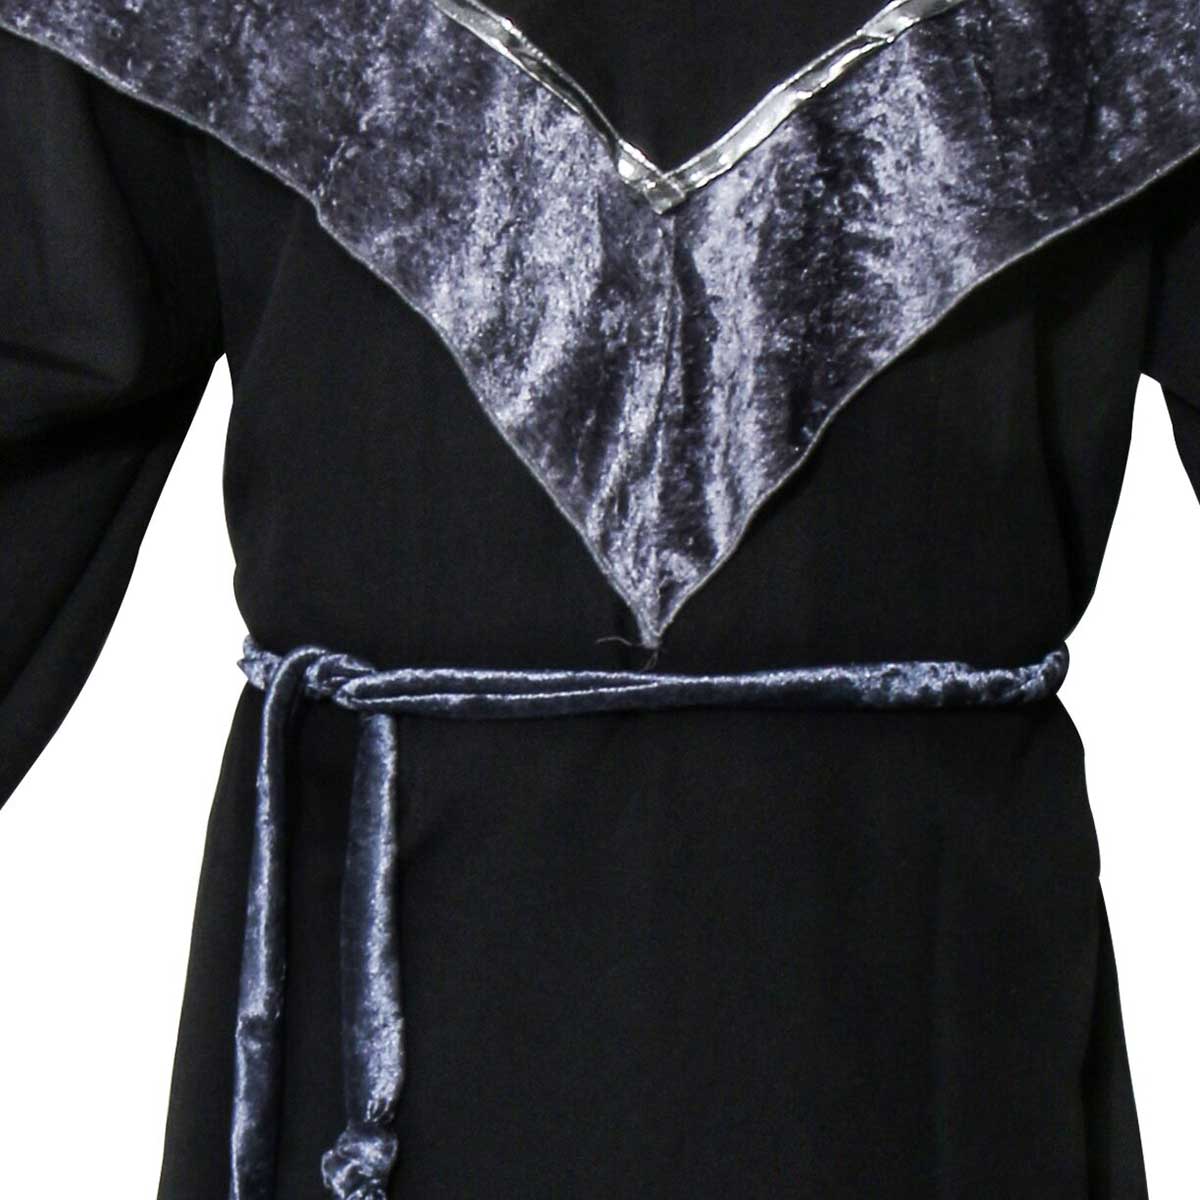 Adult Men Wizard Priest Outfit Dark Sorcerer Robe Monk Robe Religious Godfather Wizard Costume Halloween Devil Witch Cosplay